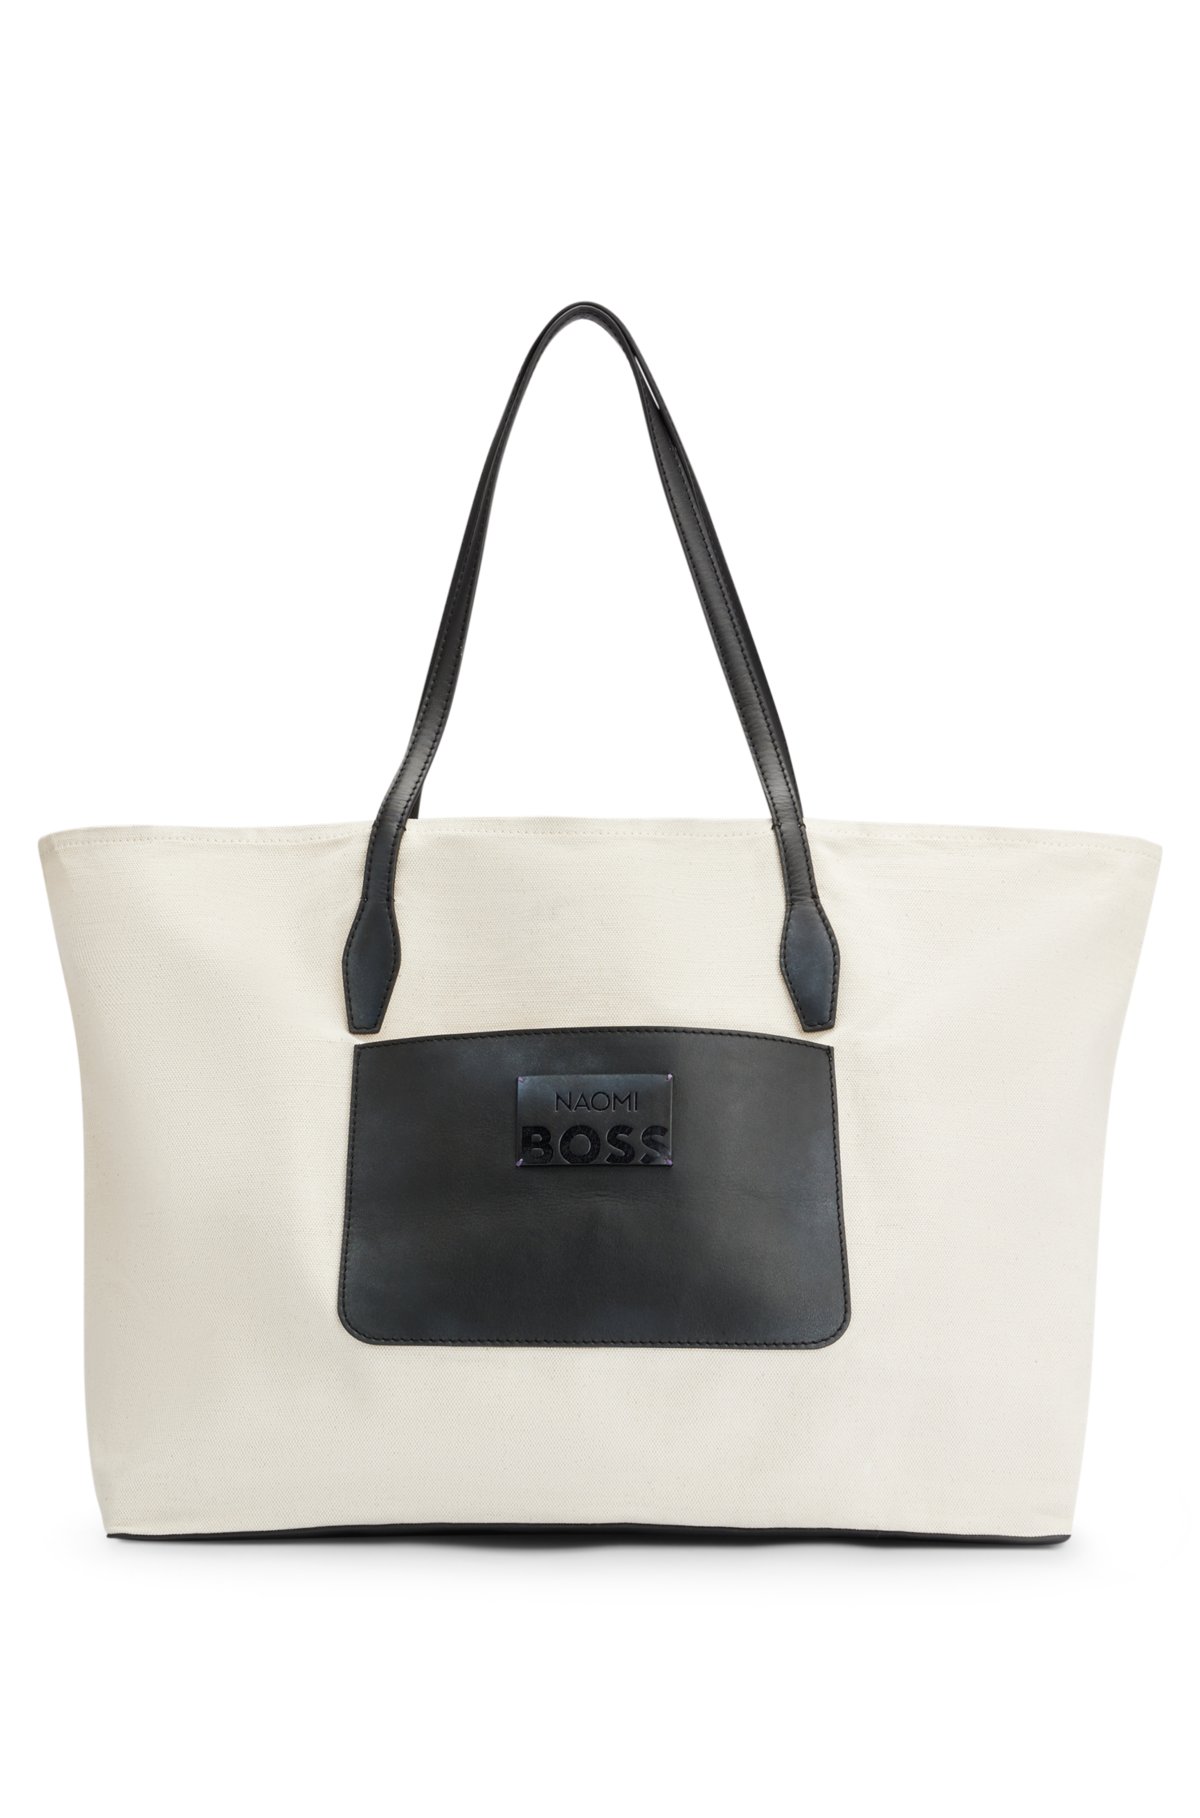 BOSS - NAOMI x BOSS leather-trimmed shopper bag with detachable pouch